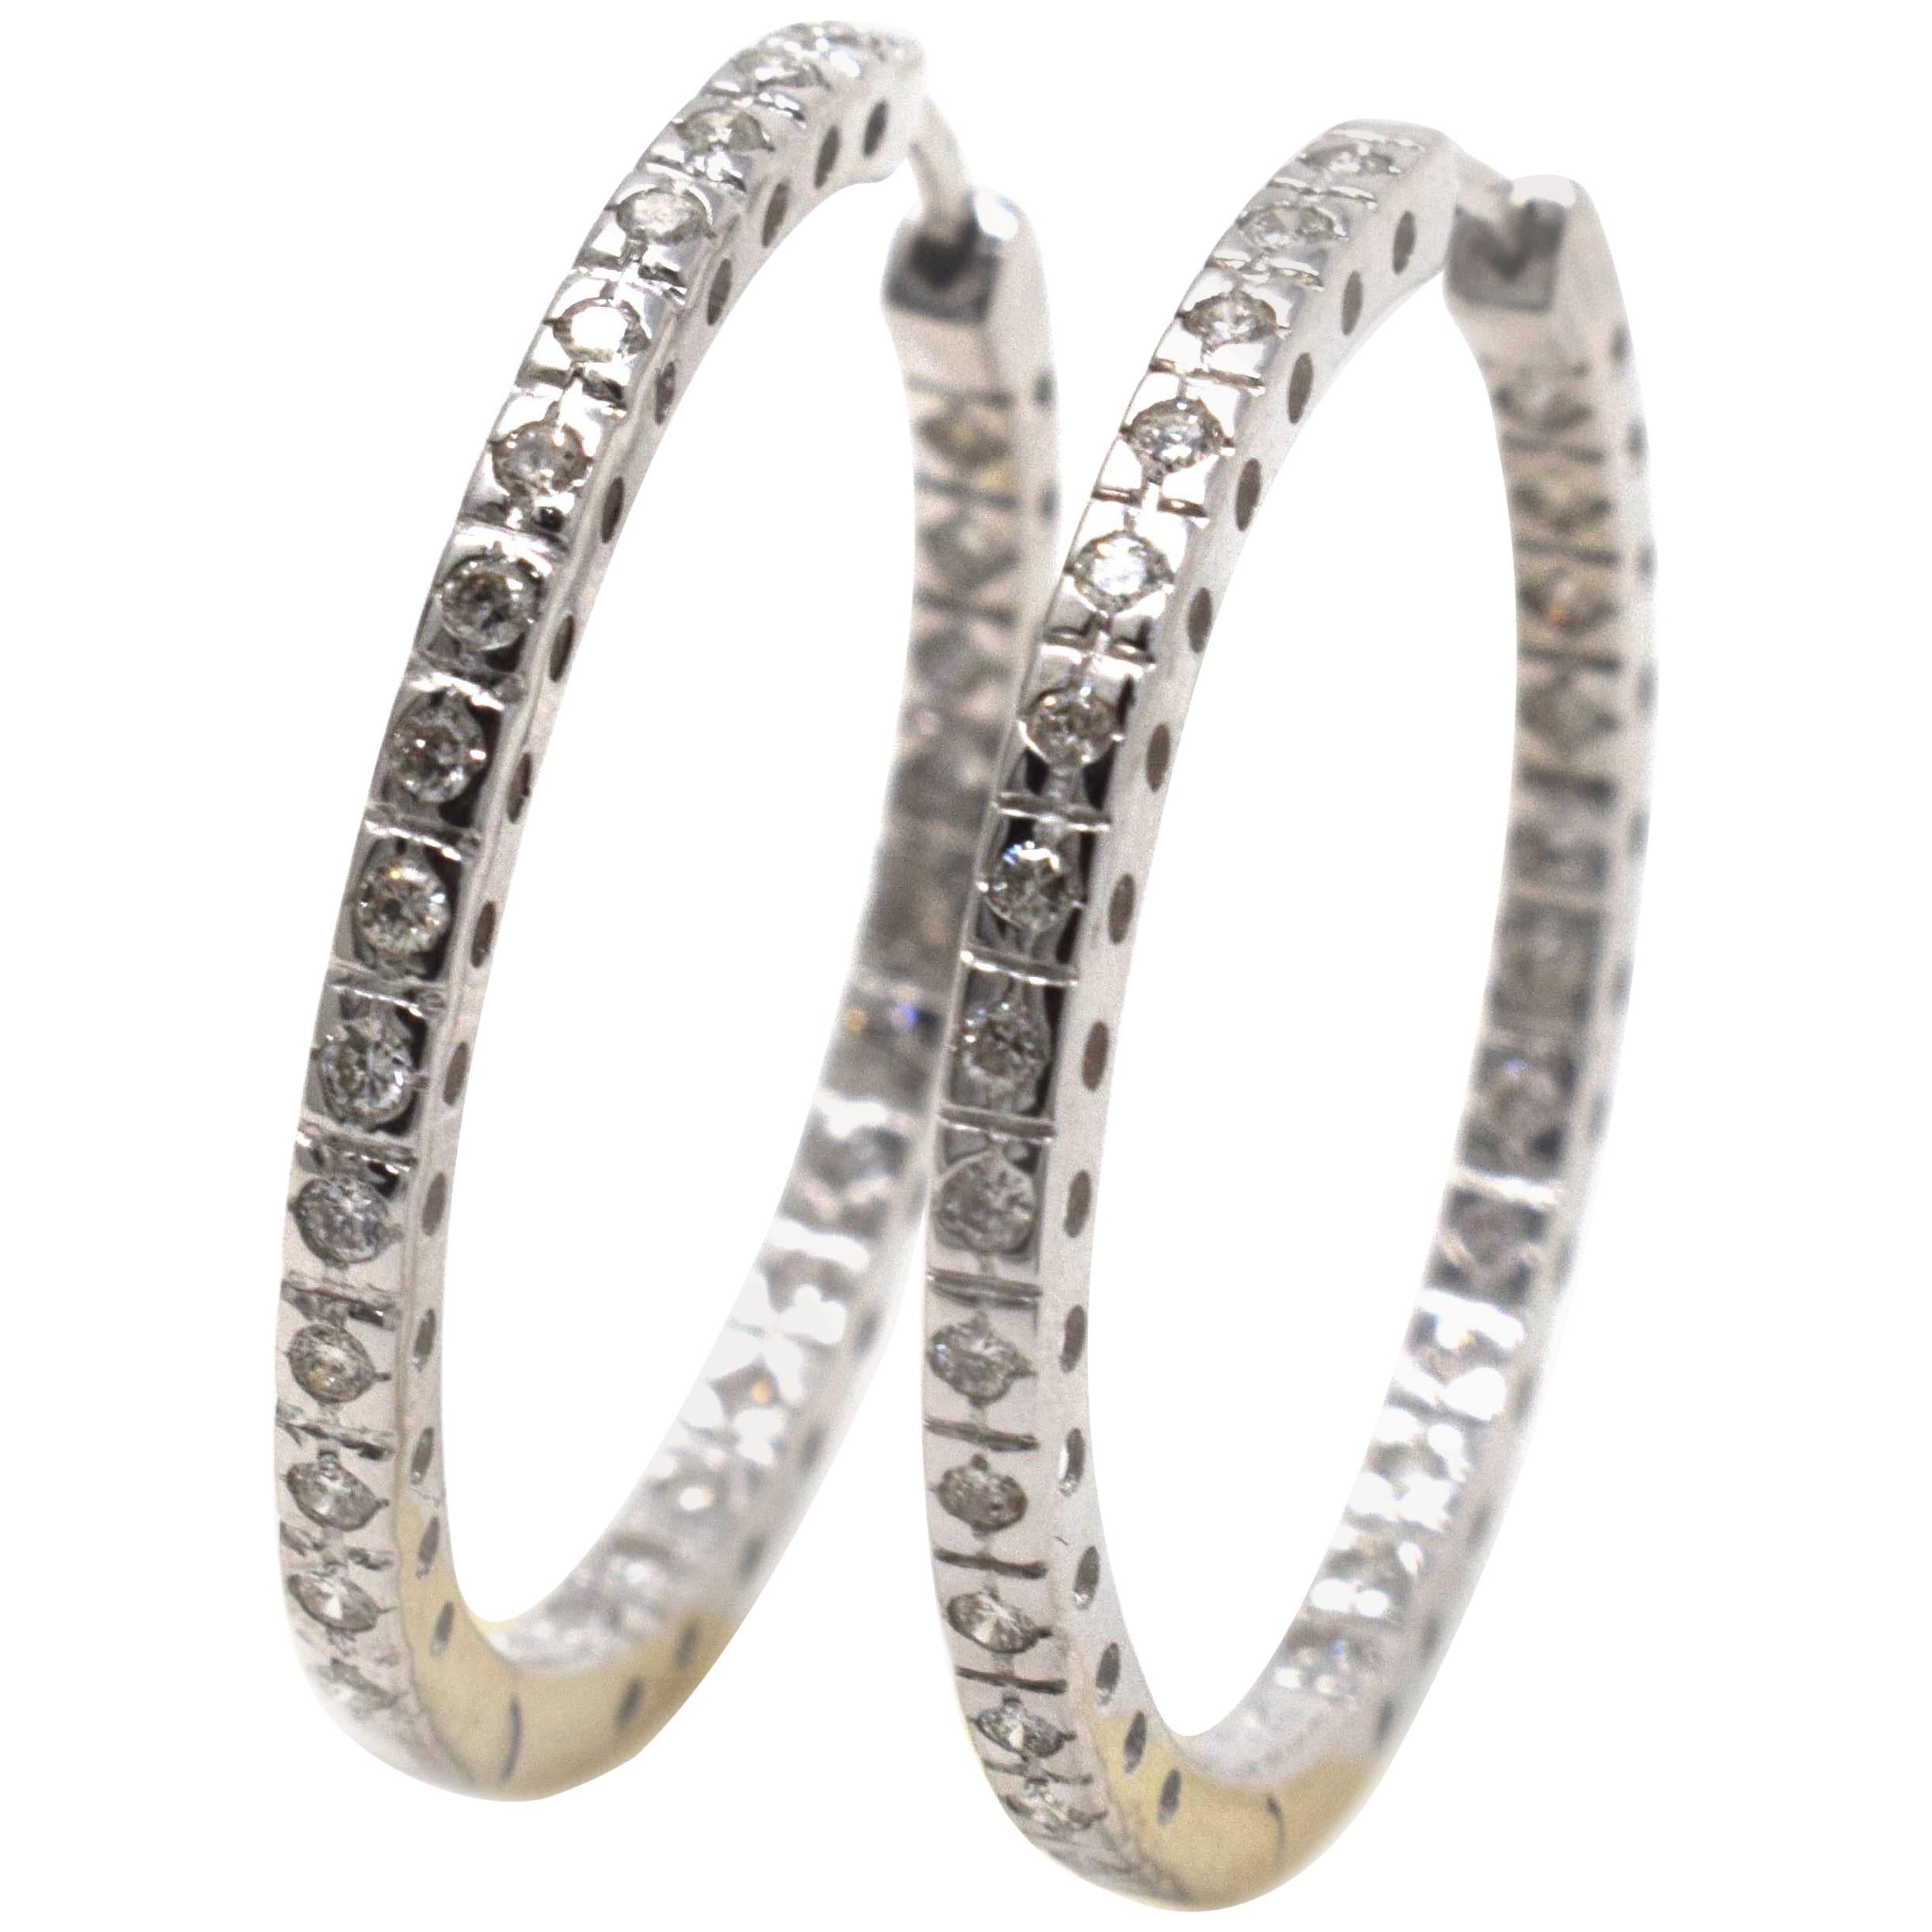 Inside and Out Diamond 54 Diamond in White Gold Hoop Earrings